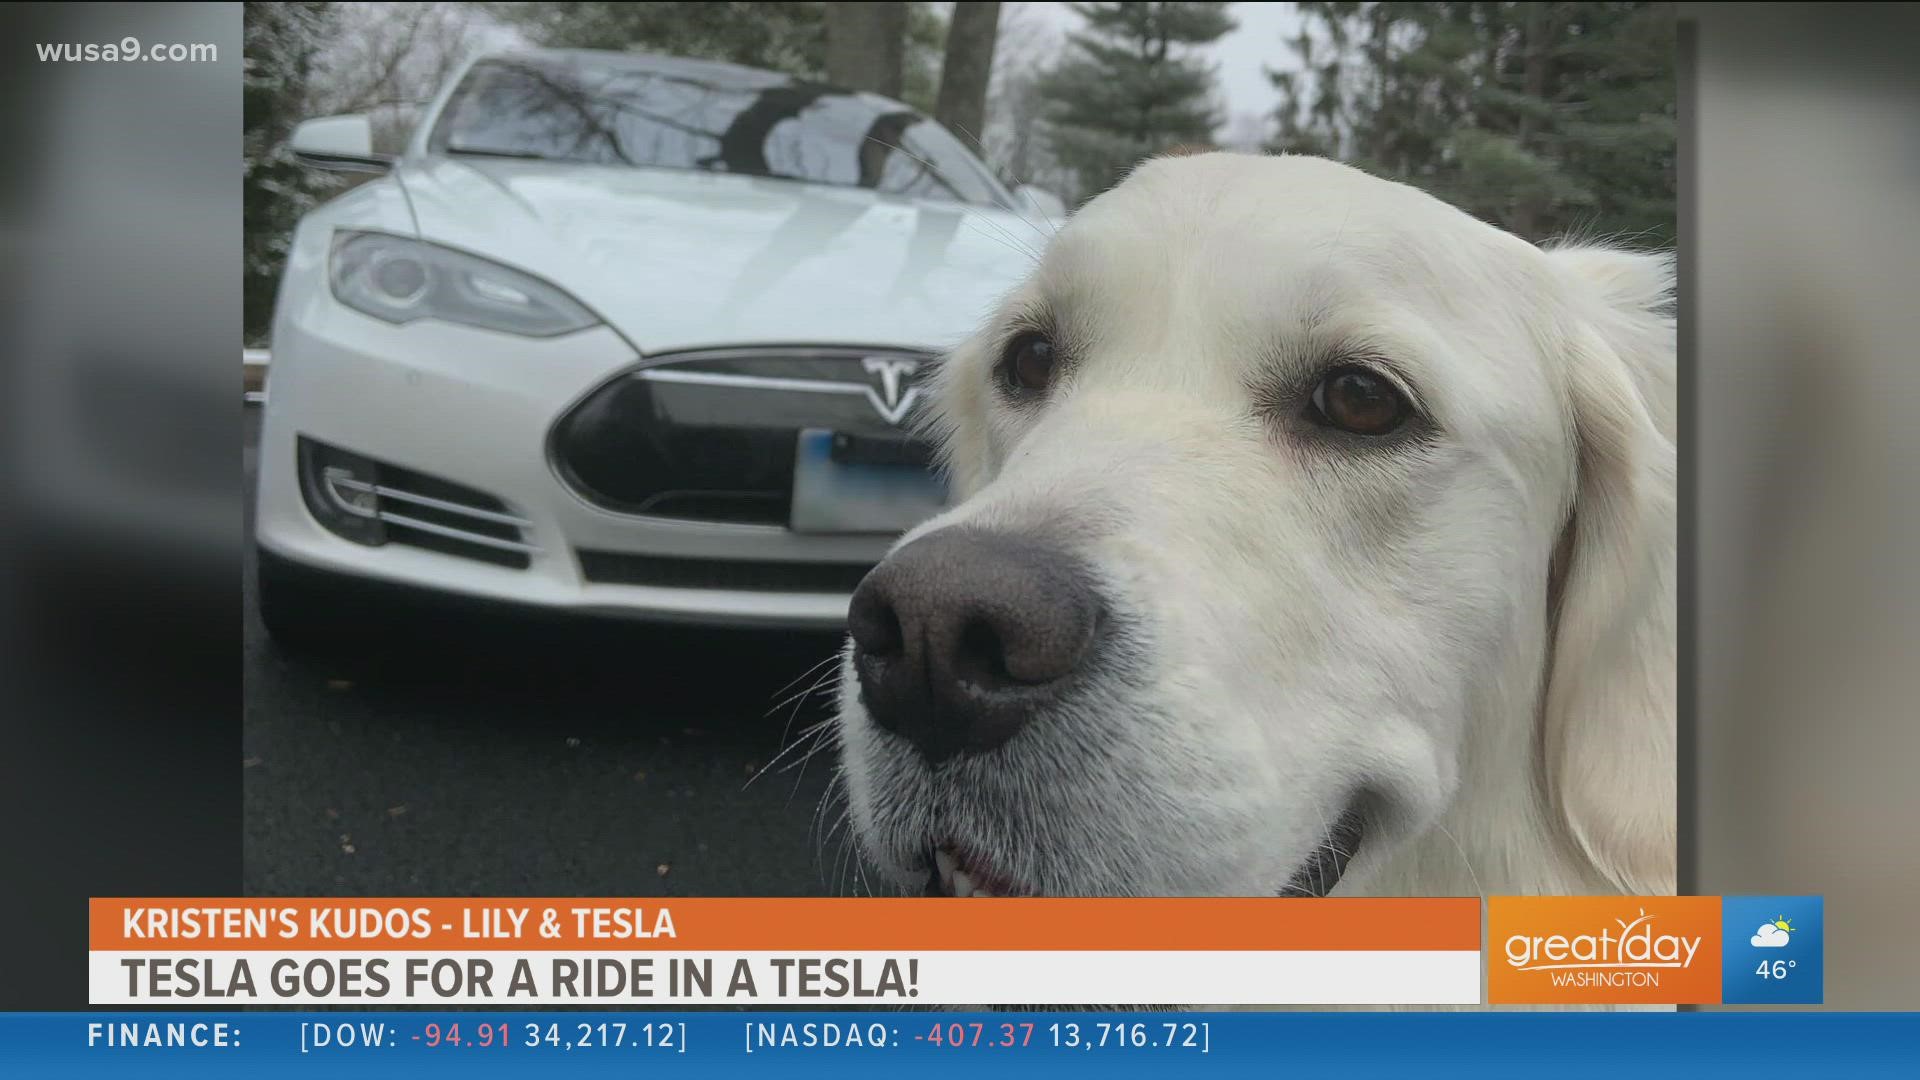 The Fulton family in Maryland created a bucket list for their beloved dog, Tesla, as she battles cancer. Top of the list... take a ride in a Tesla. Kristen's Kudos.